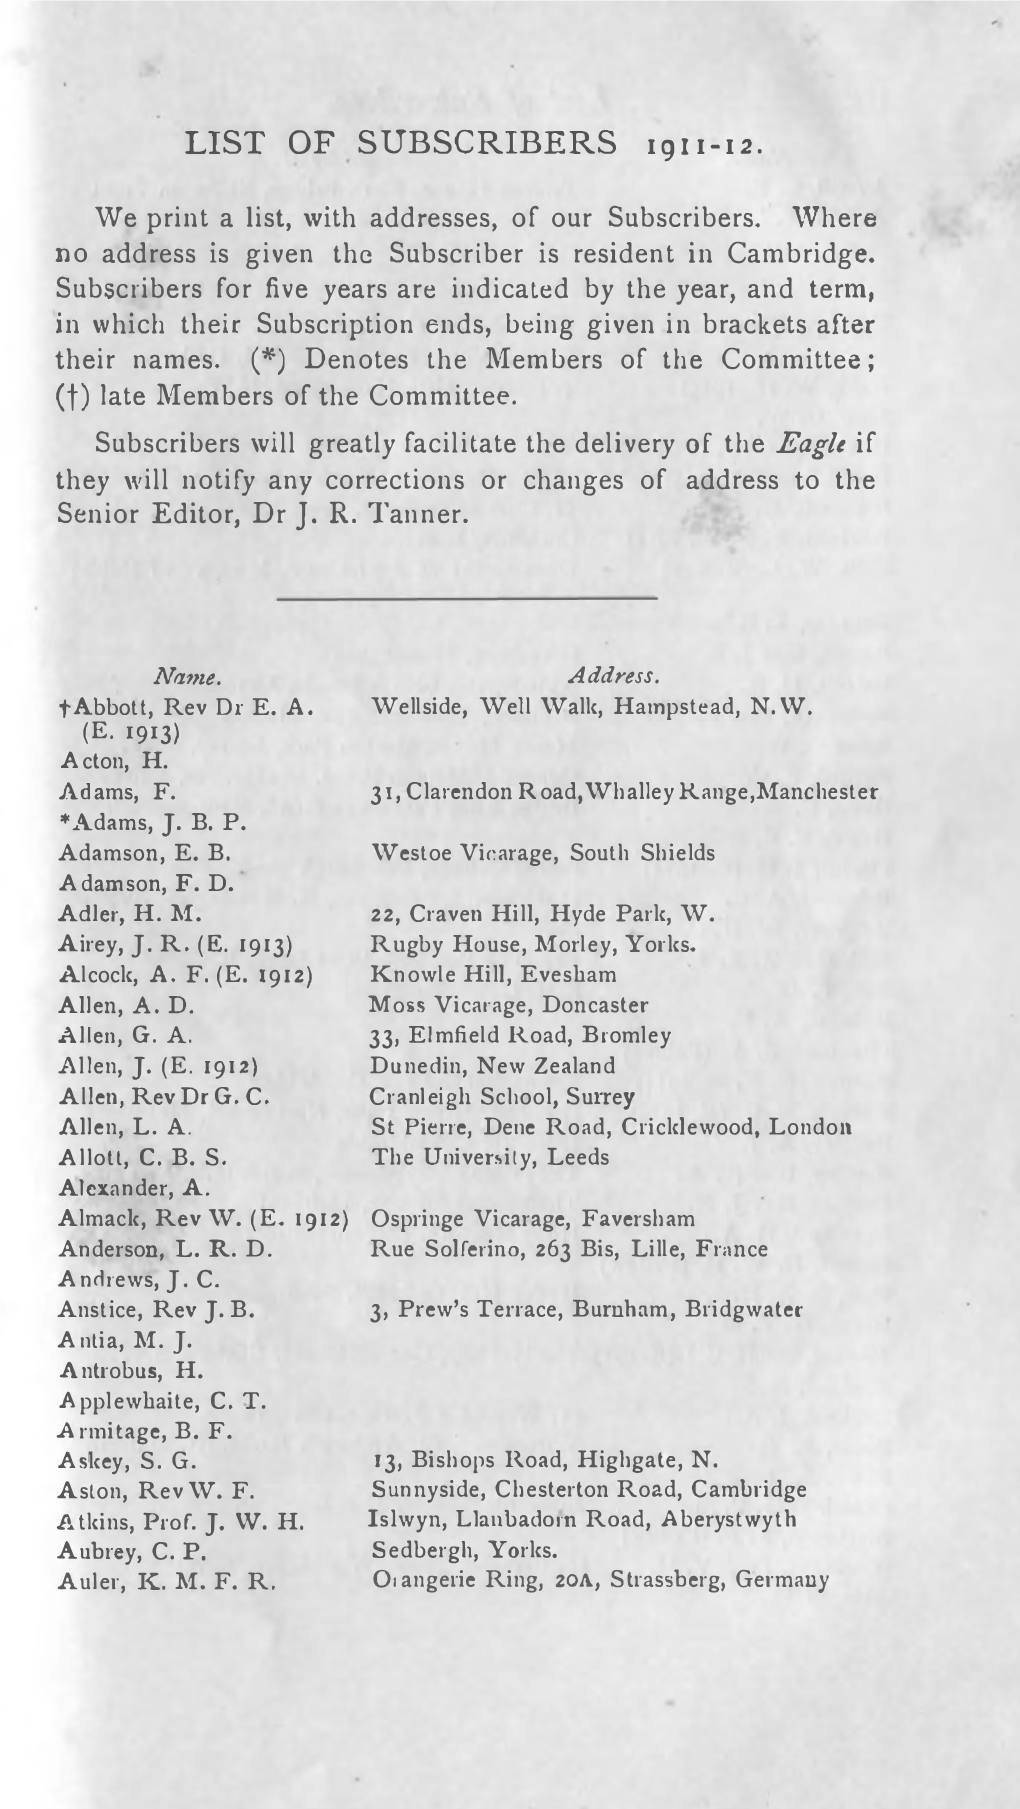 List of Subscribers 1912